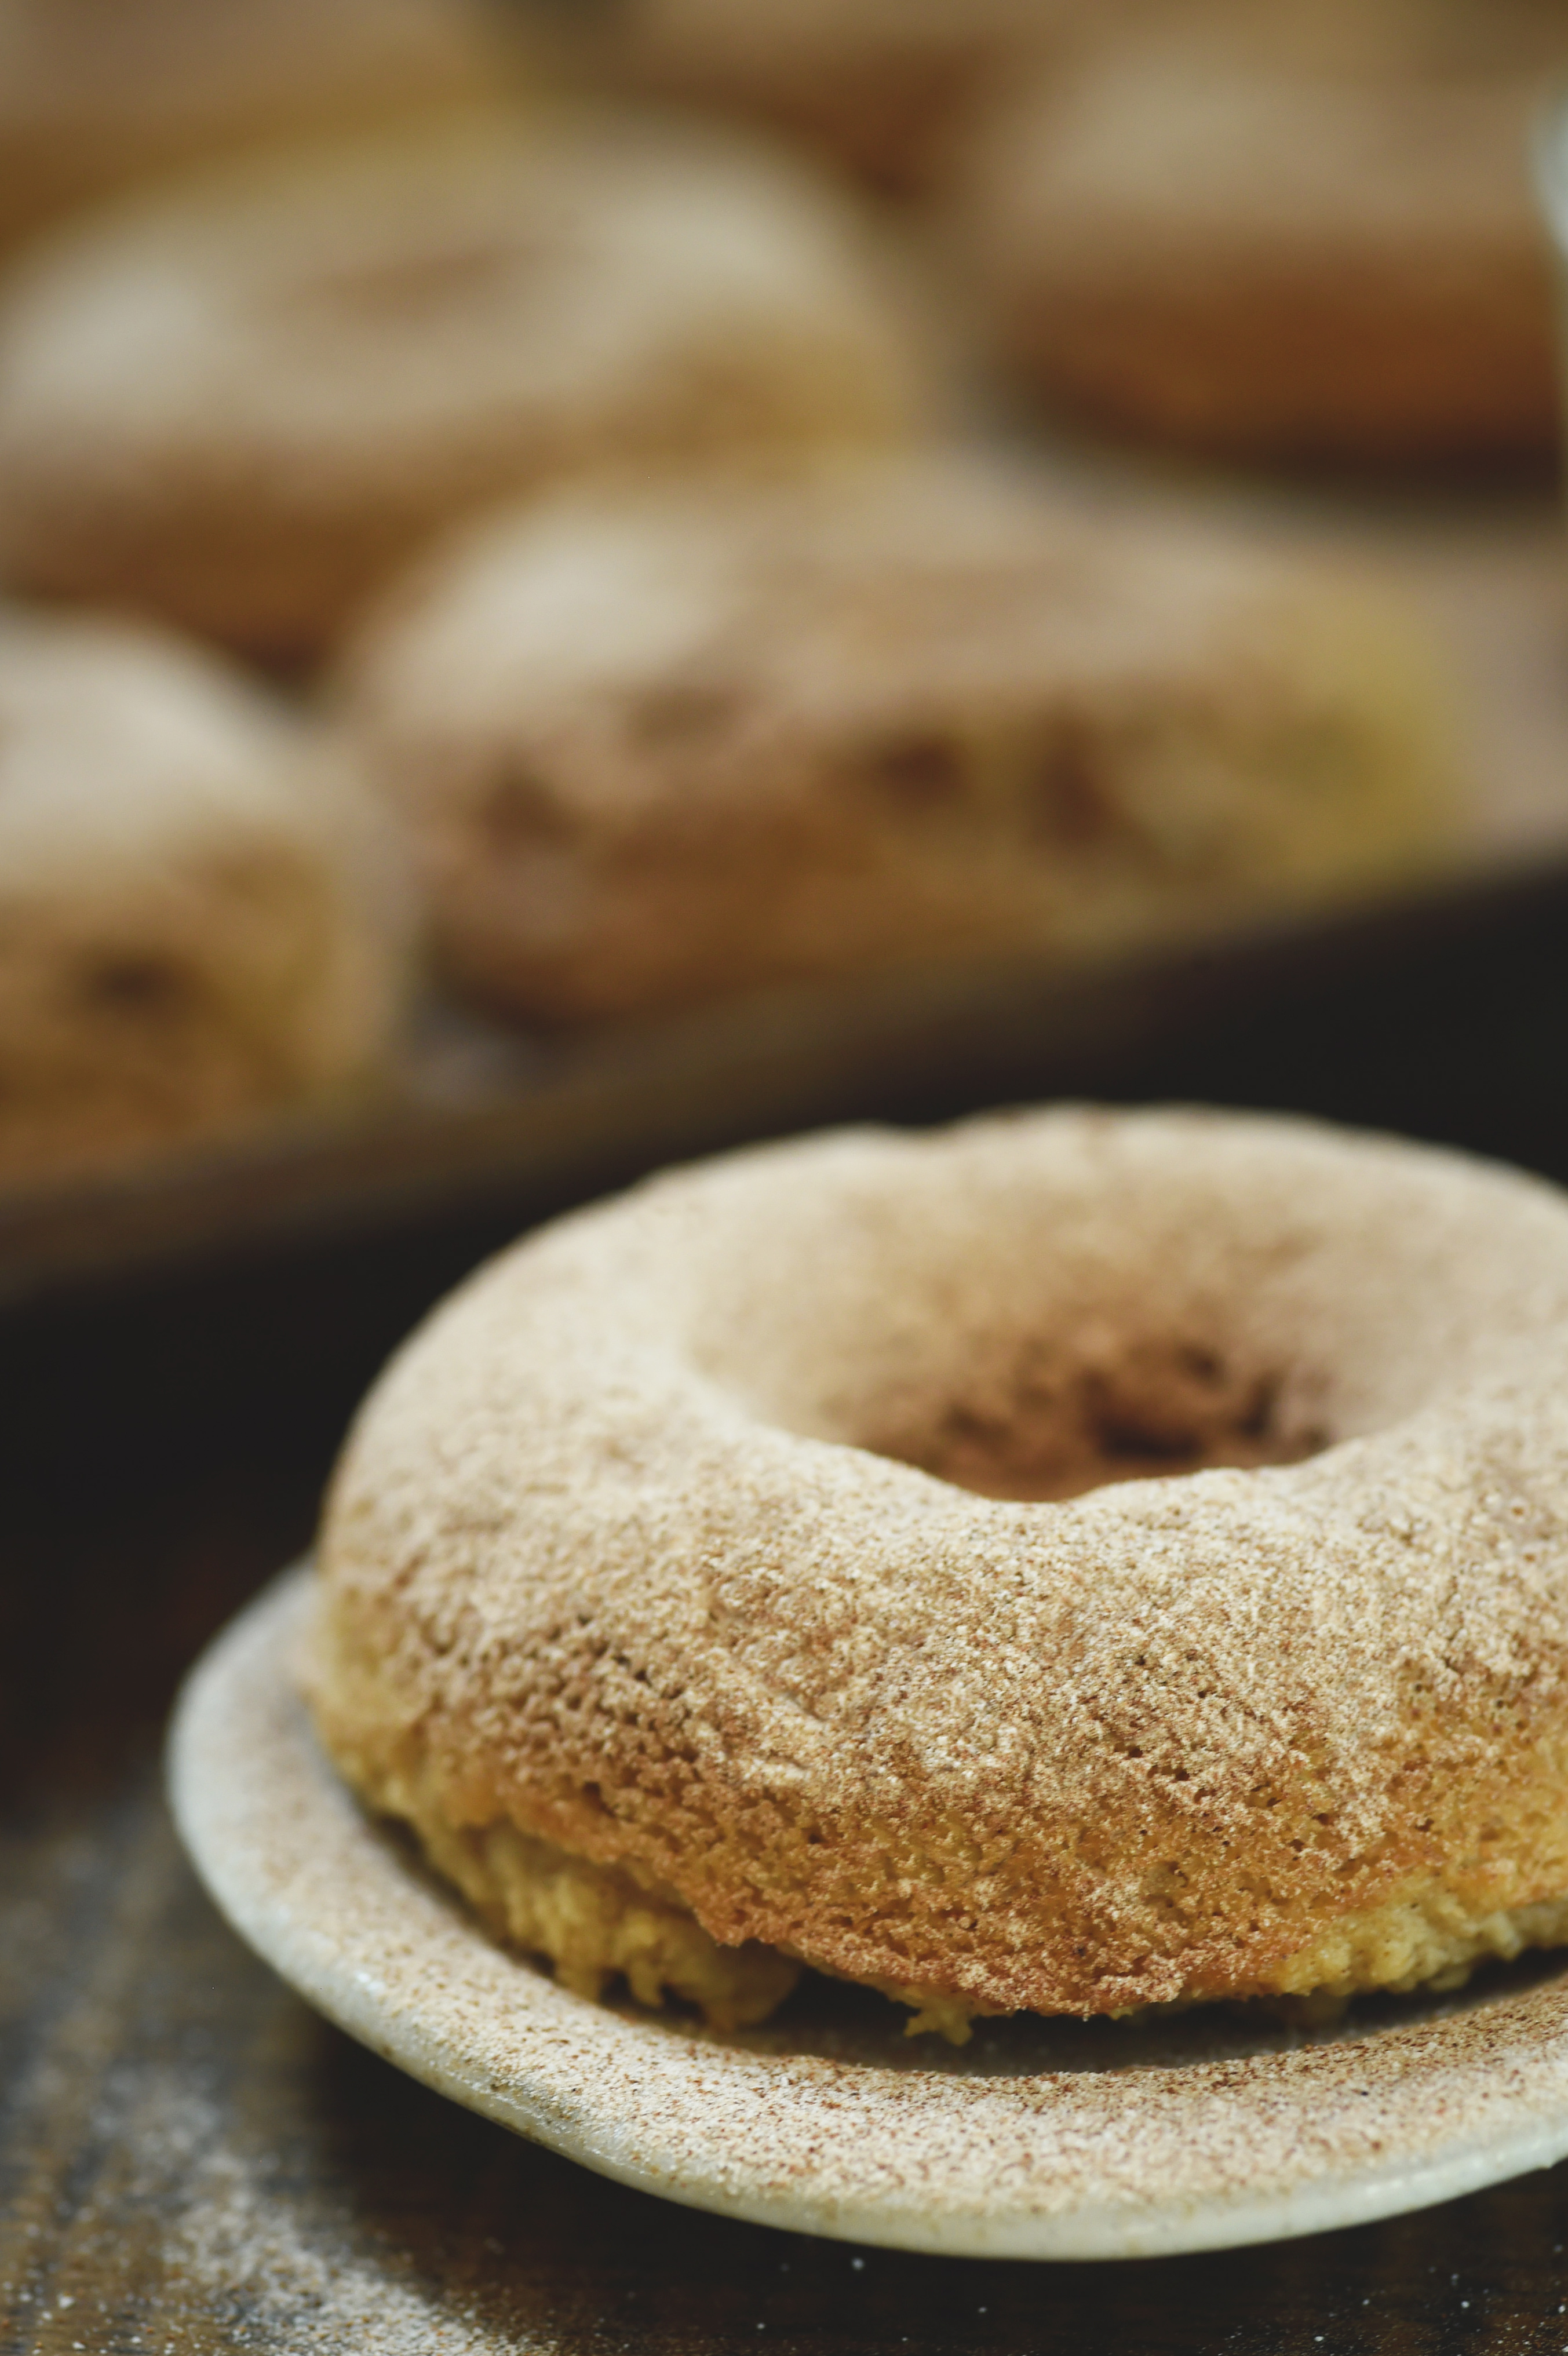 Low-Carb Cinnamon Sour Cream Donuts-close-up of a donut.